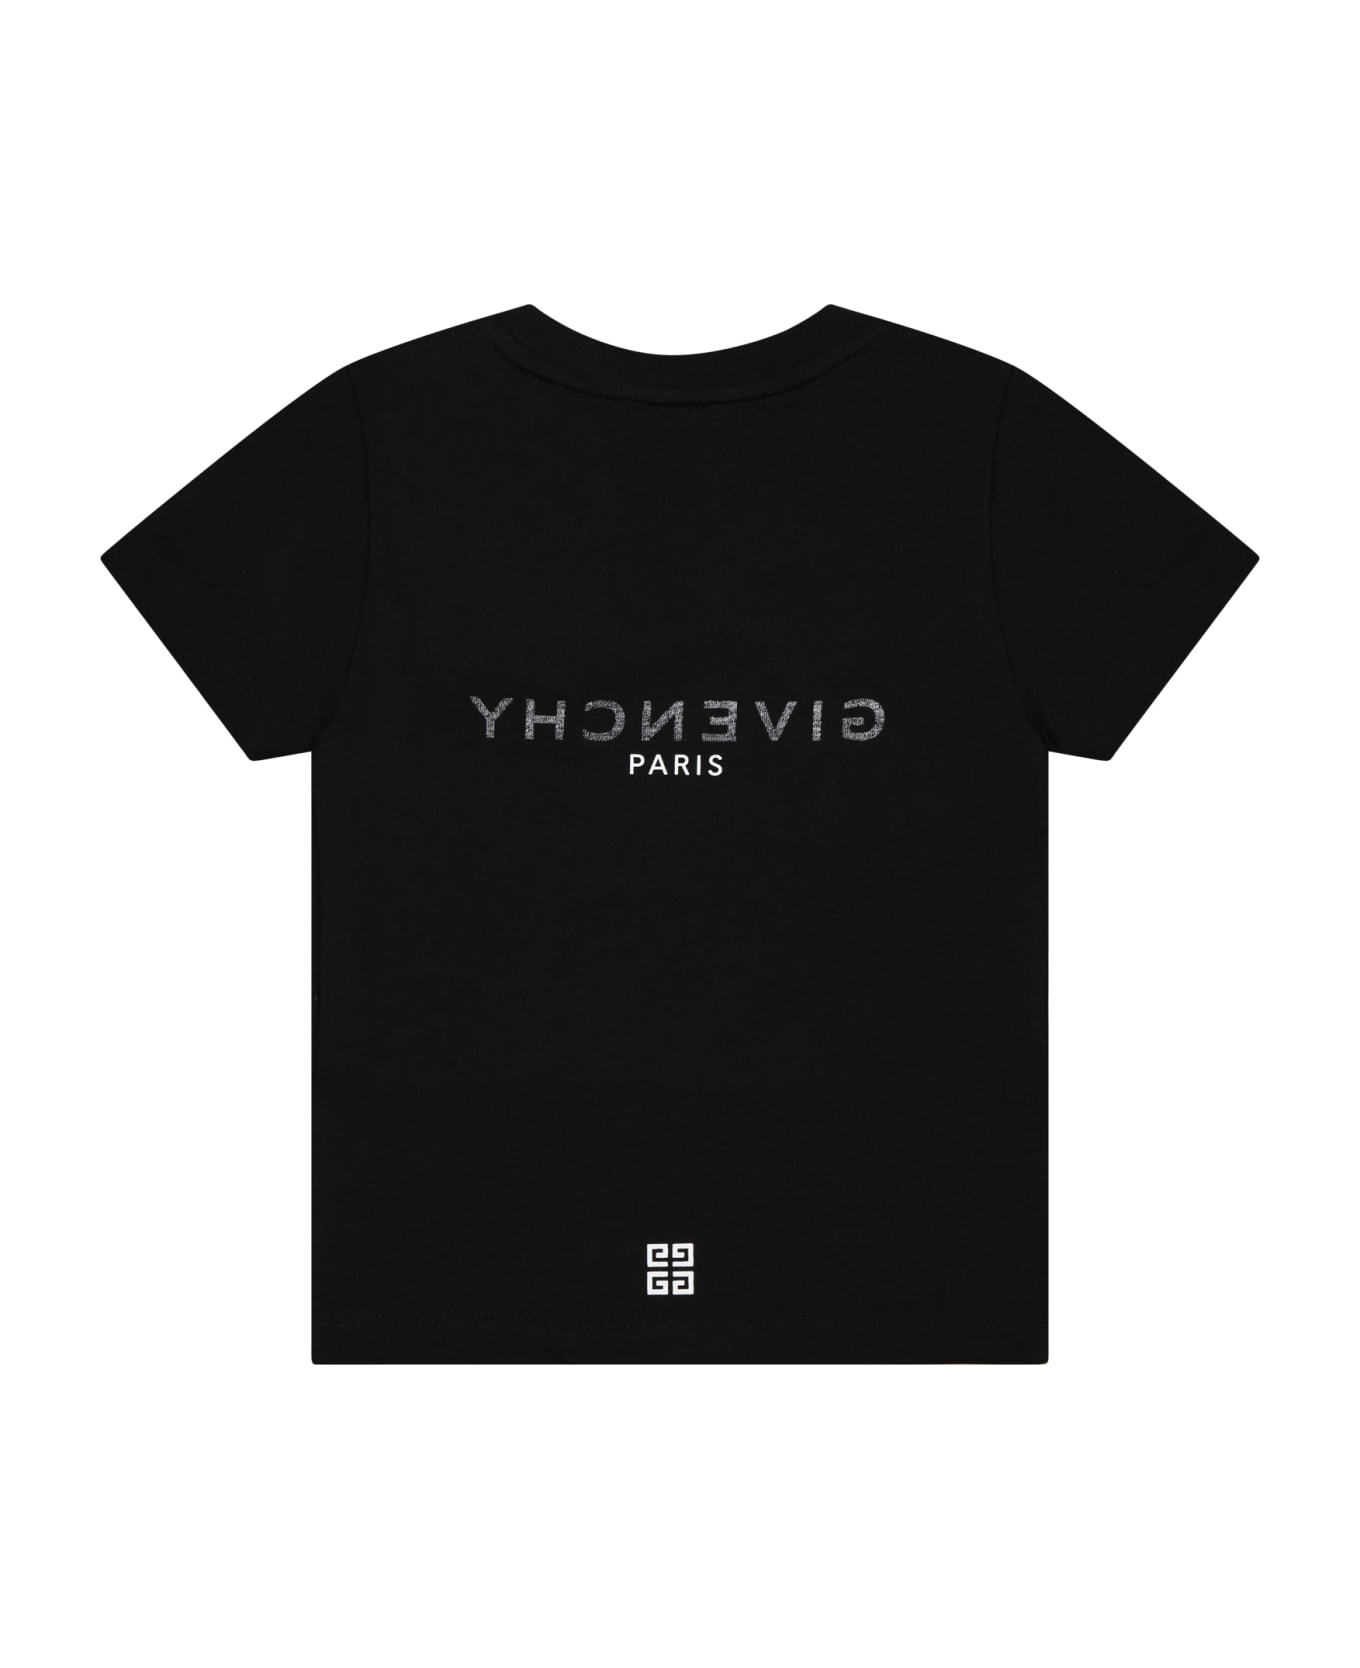 Givenchy Black T-shirt For Babies With Iconic Logo - Black